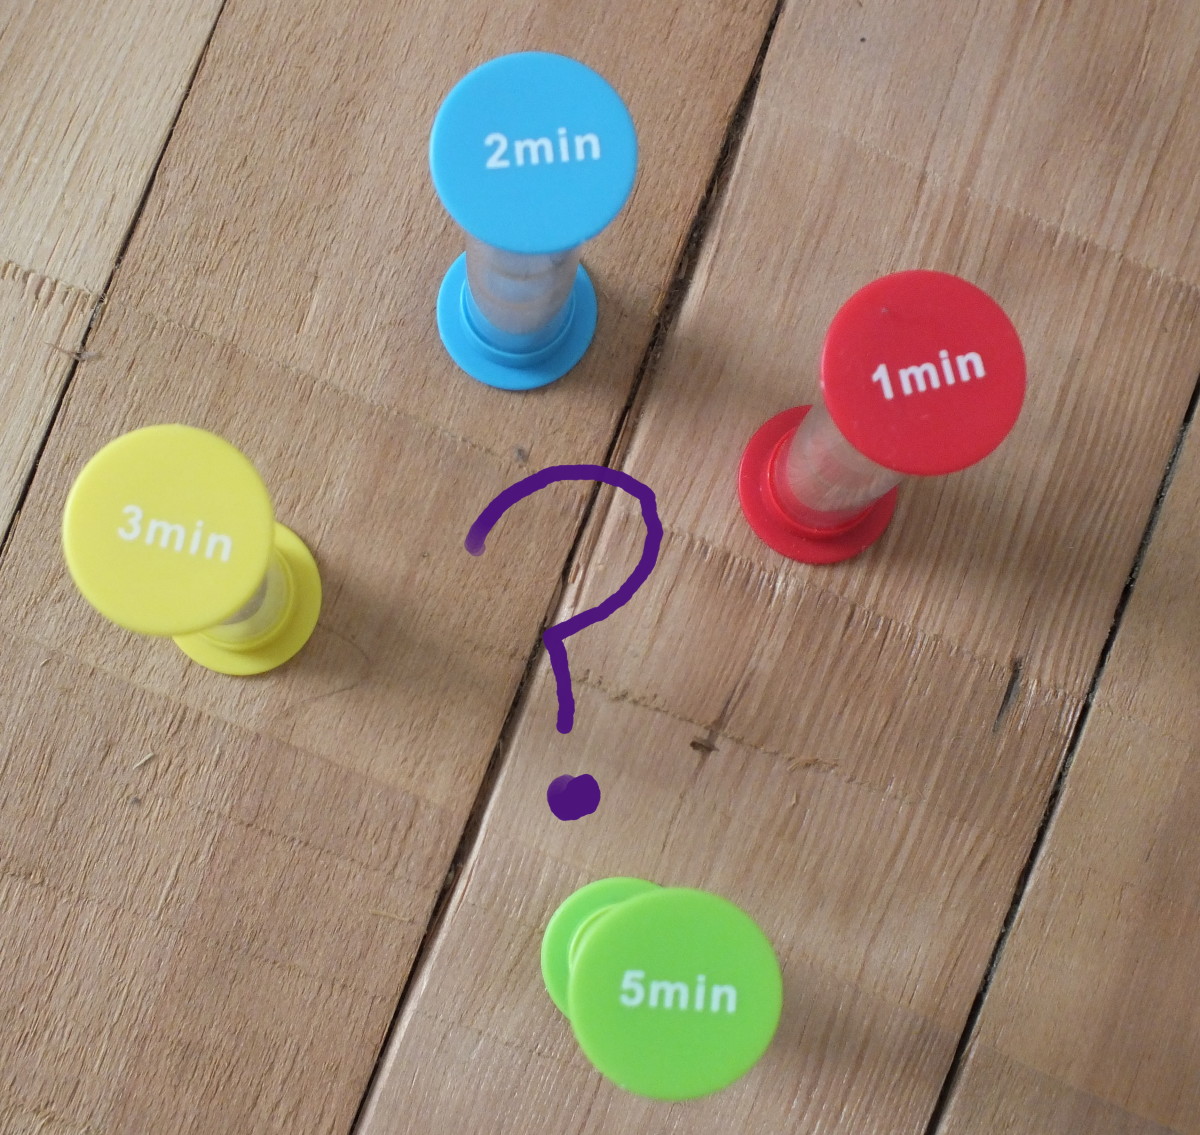 Which timer or timers will help you count ten minutes?